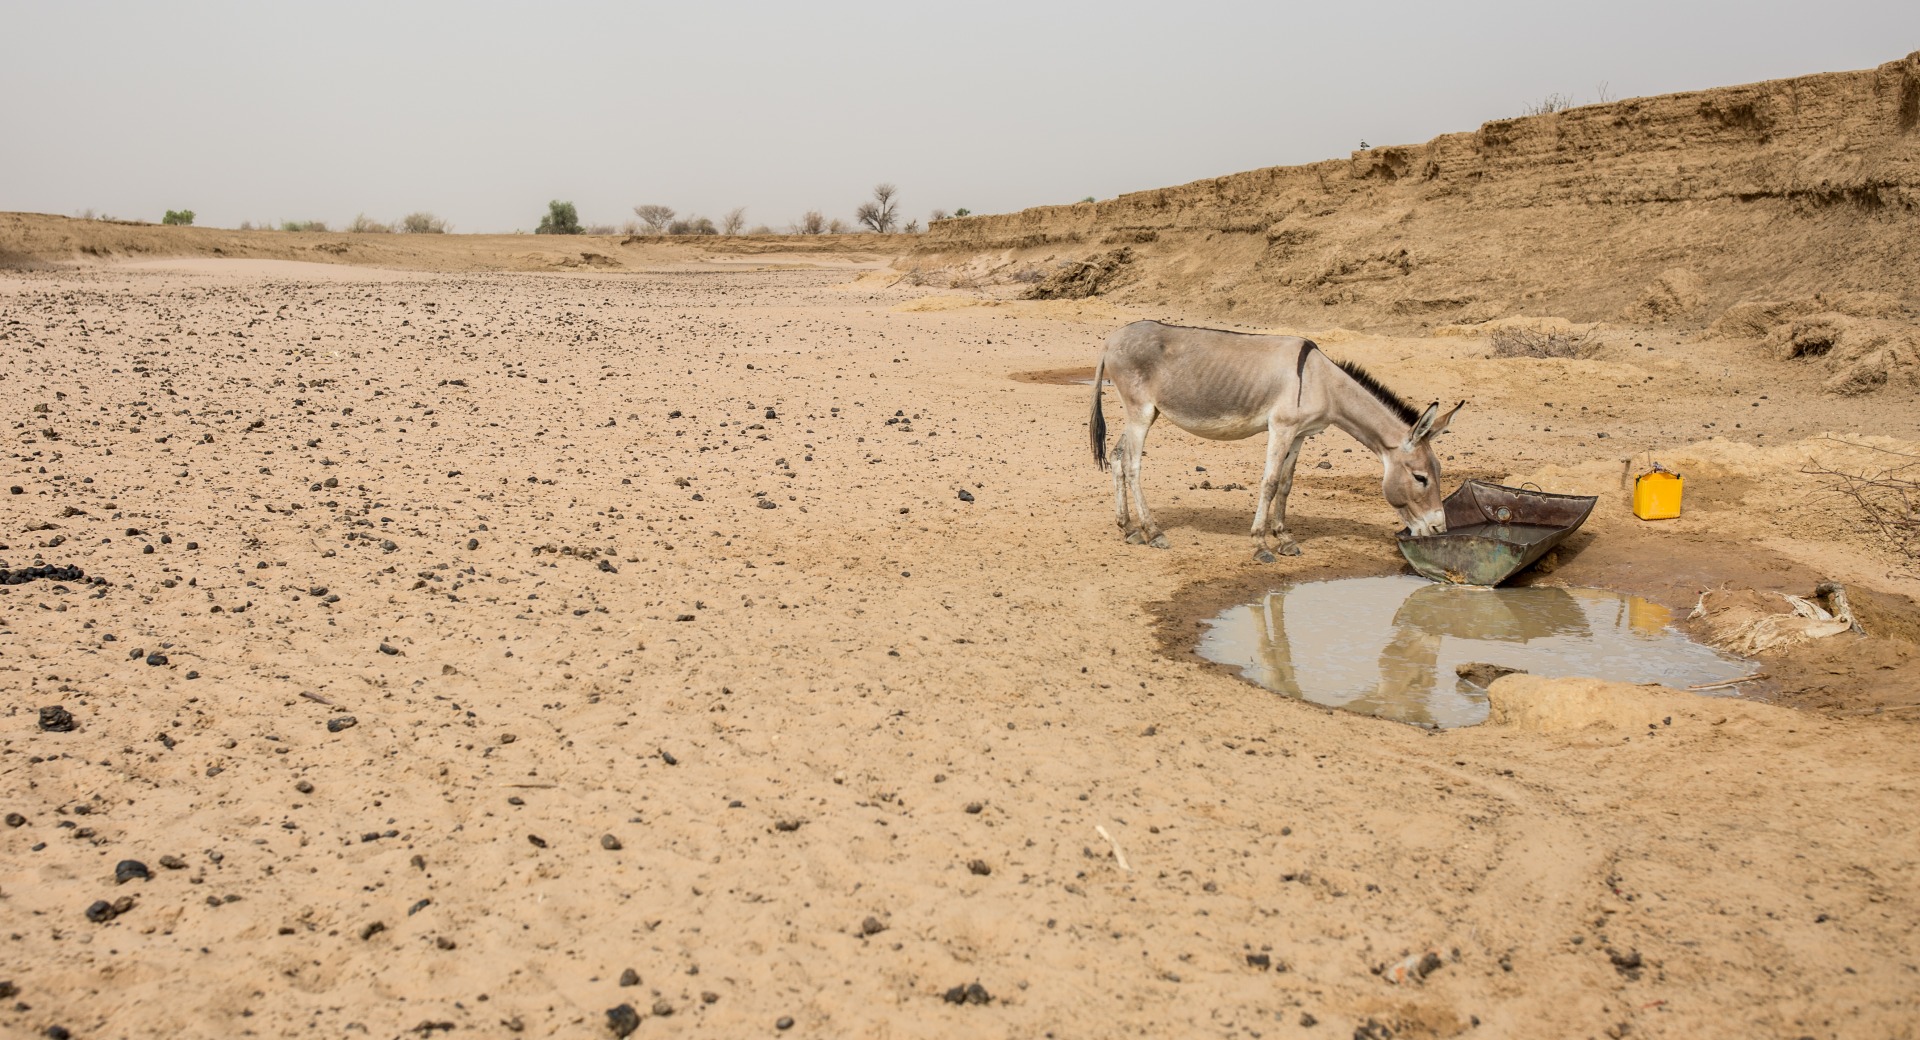 Climate change makes life challenging for herders as water and grazing land becomes harder to find.